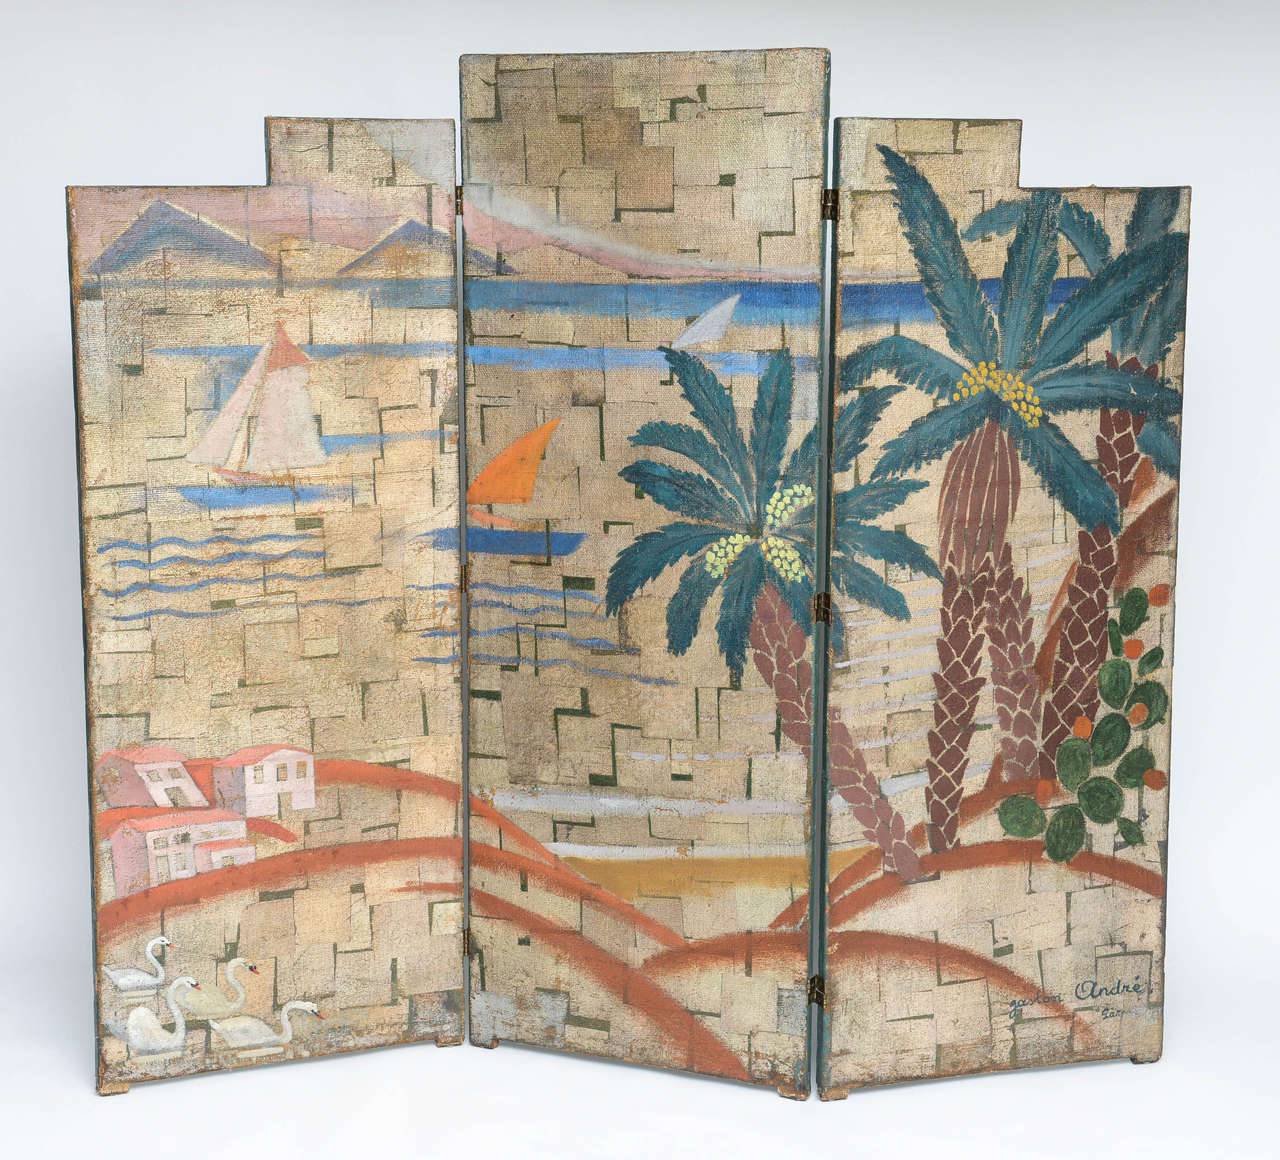 Gaston André (1884-1970) was a French muralist and painter specializing in animals and landscapes for theaters, cinemas and hotels. This visually striking three-panel folding screen decorated with oil paint and gold leaf depicts the French Riviera